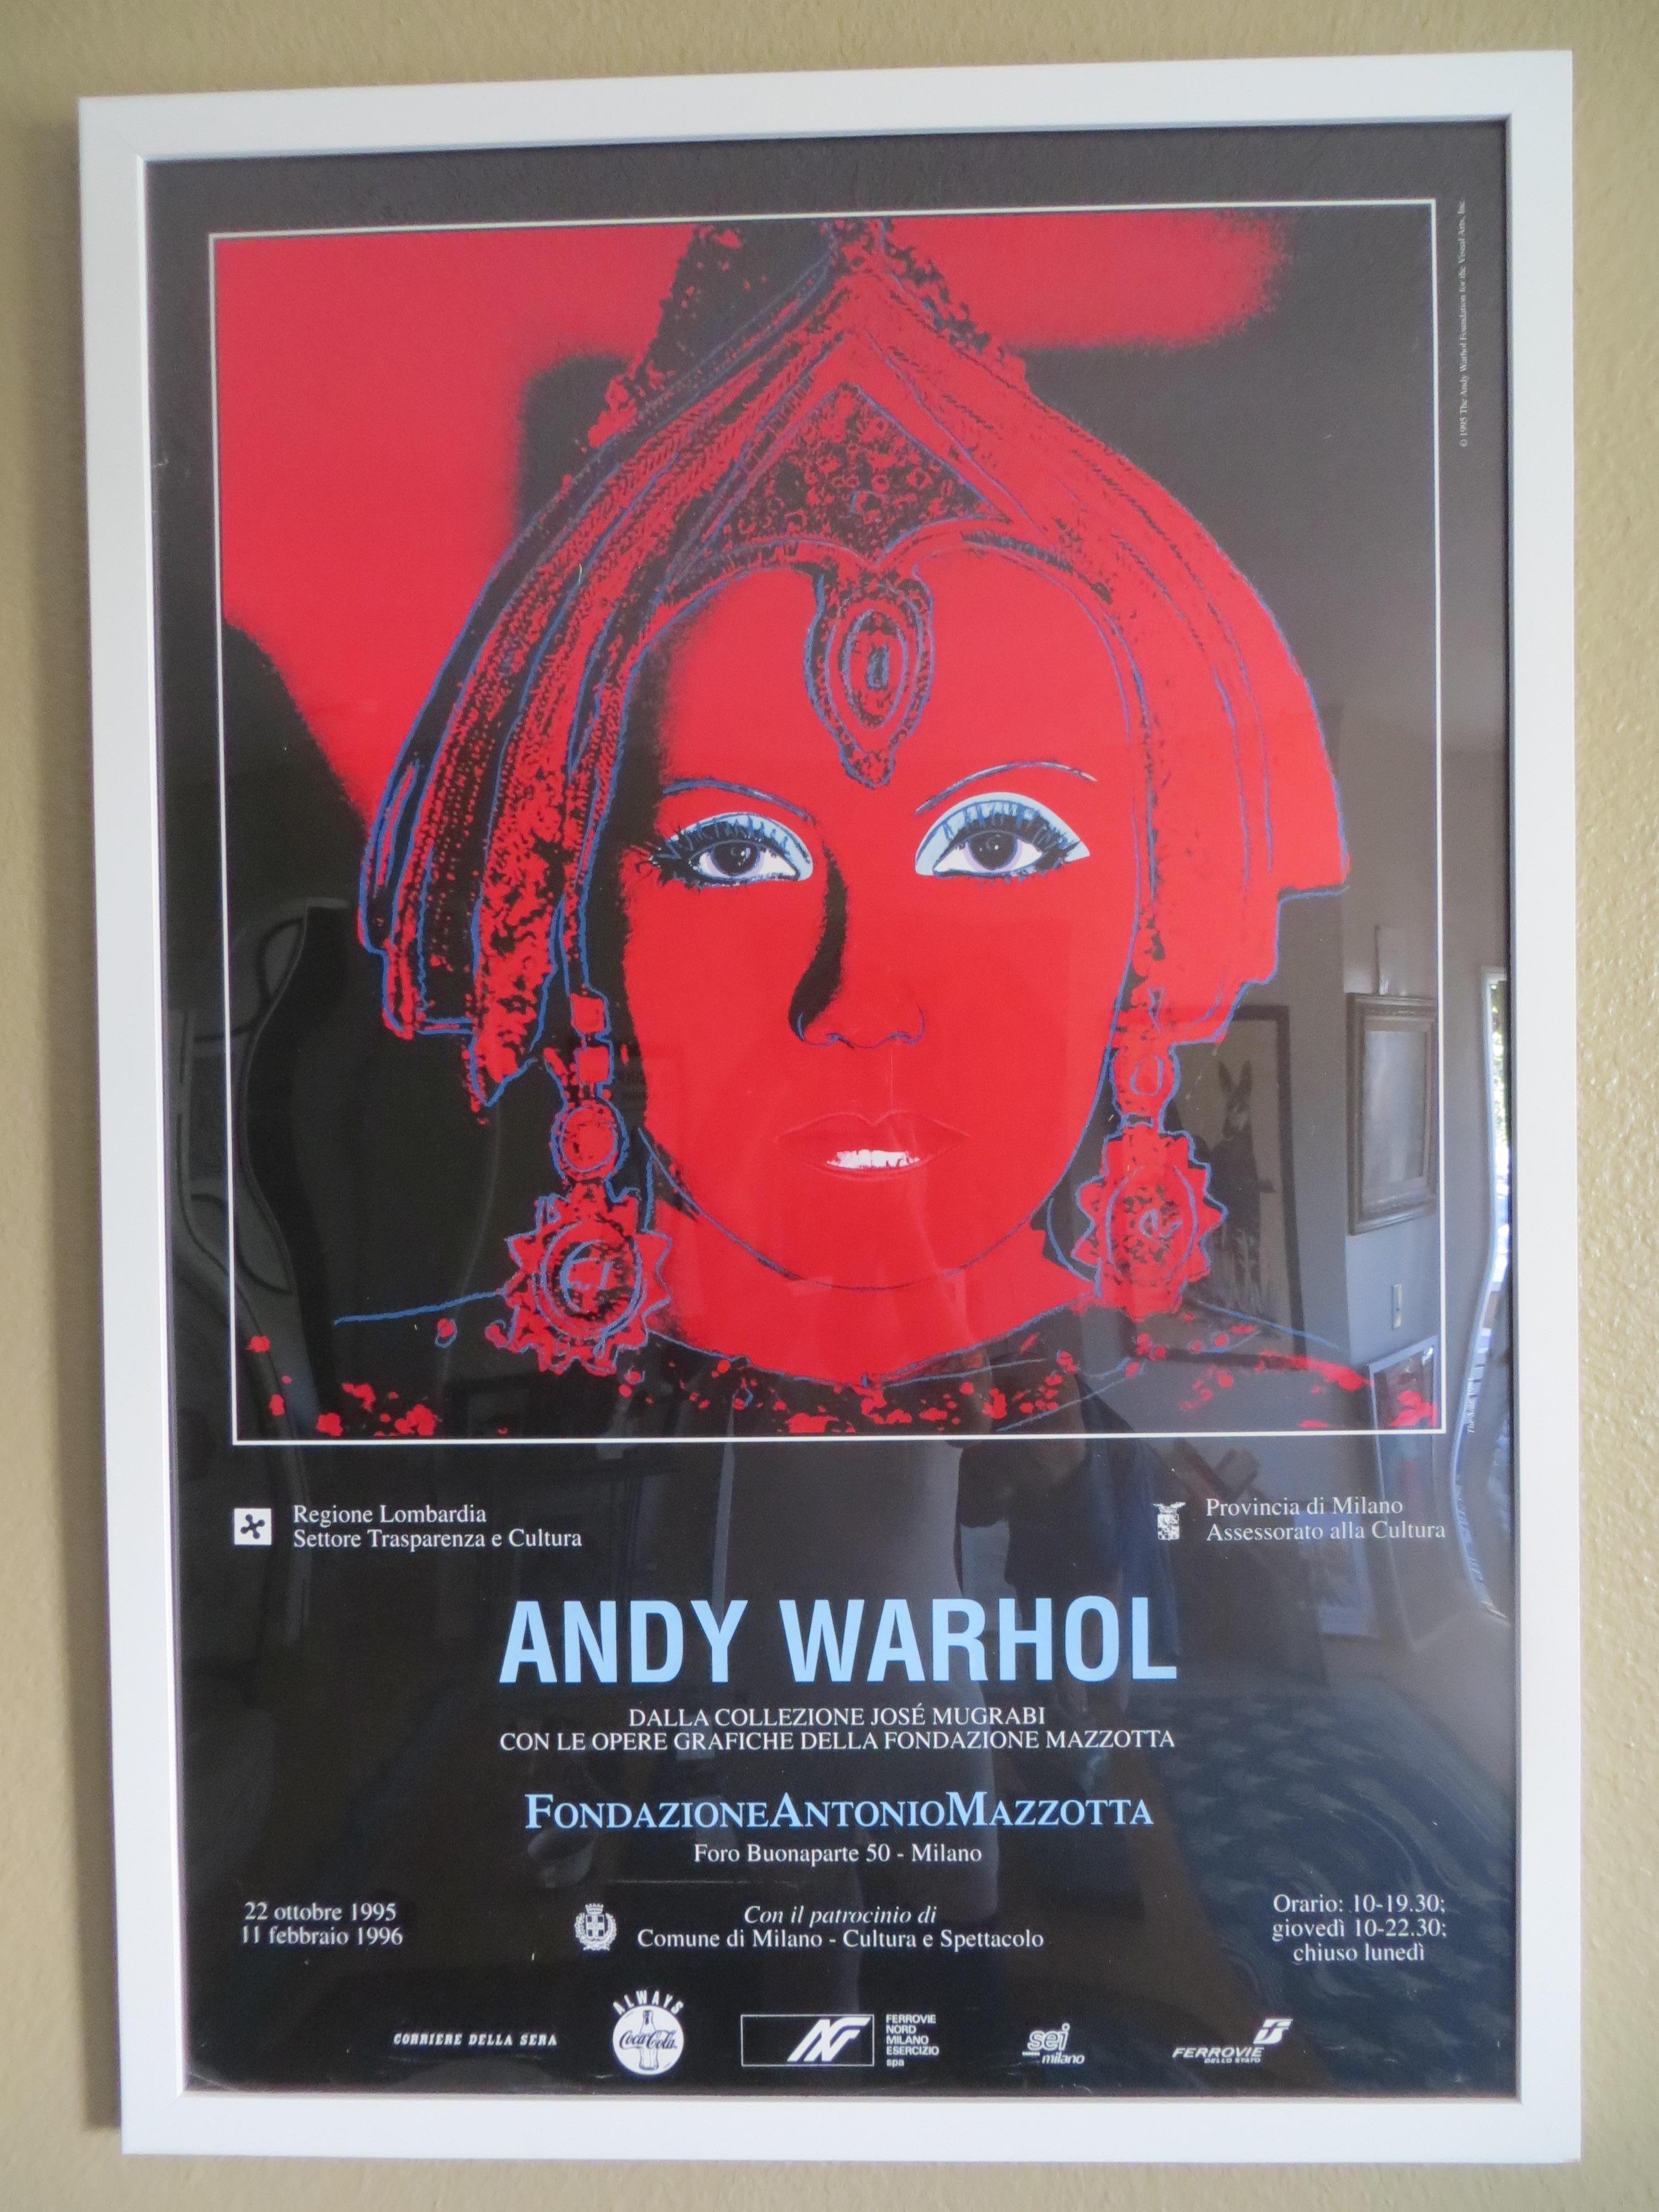 
Andy Warhol  Greta Garbo  Mata Hari  Large Poster first expo Italy.
 Vintage  1995 Pop Art Poster.
 Framed .  Exhibition Poster lithograph print custom framed  , is an incredibly special and unique piece to add to your collection.
Warhol's most